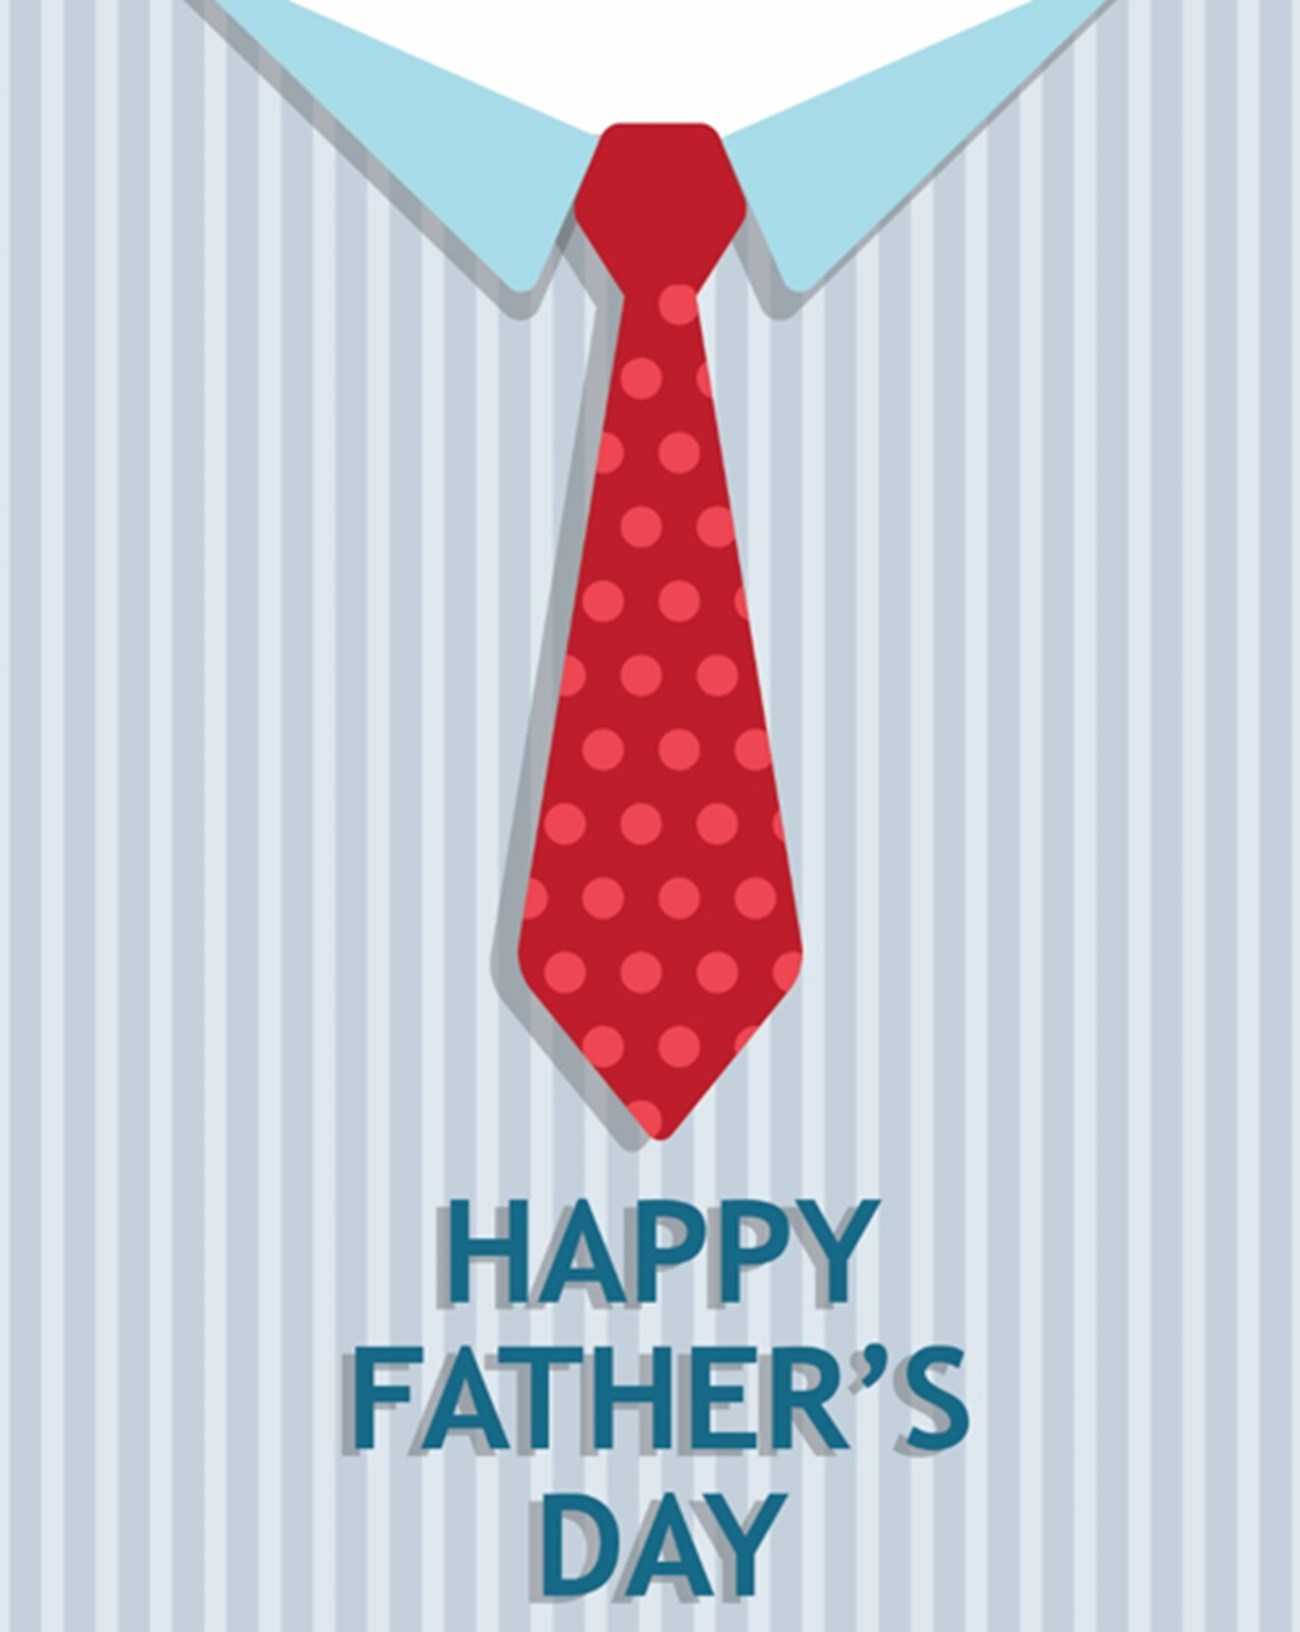 Tie Father's Day Card (Quarter Fold) In Quarter Fold Birthday Card Template